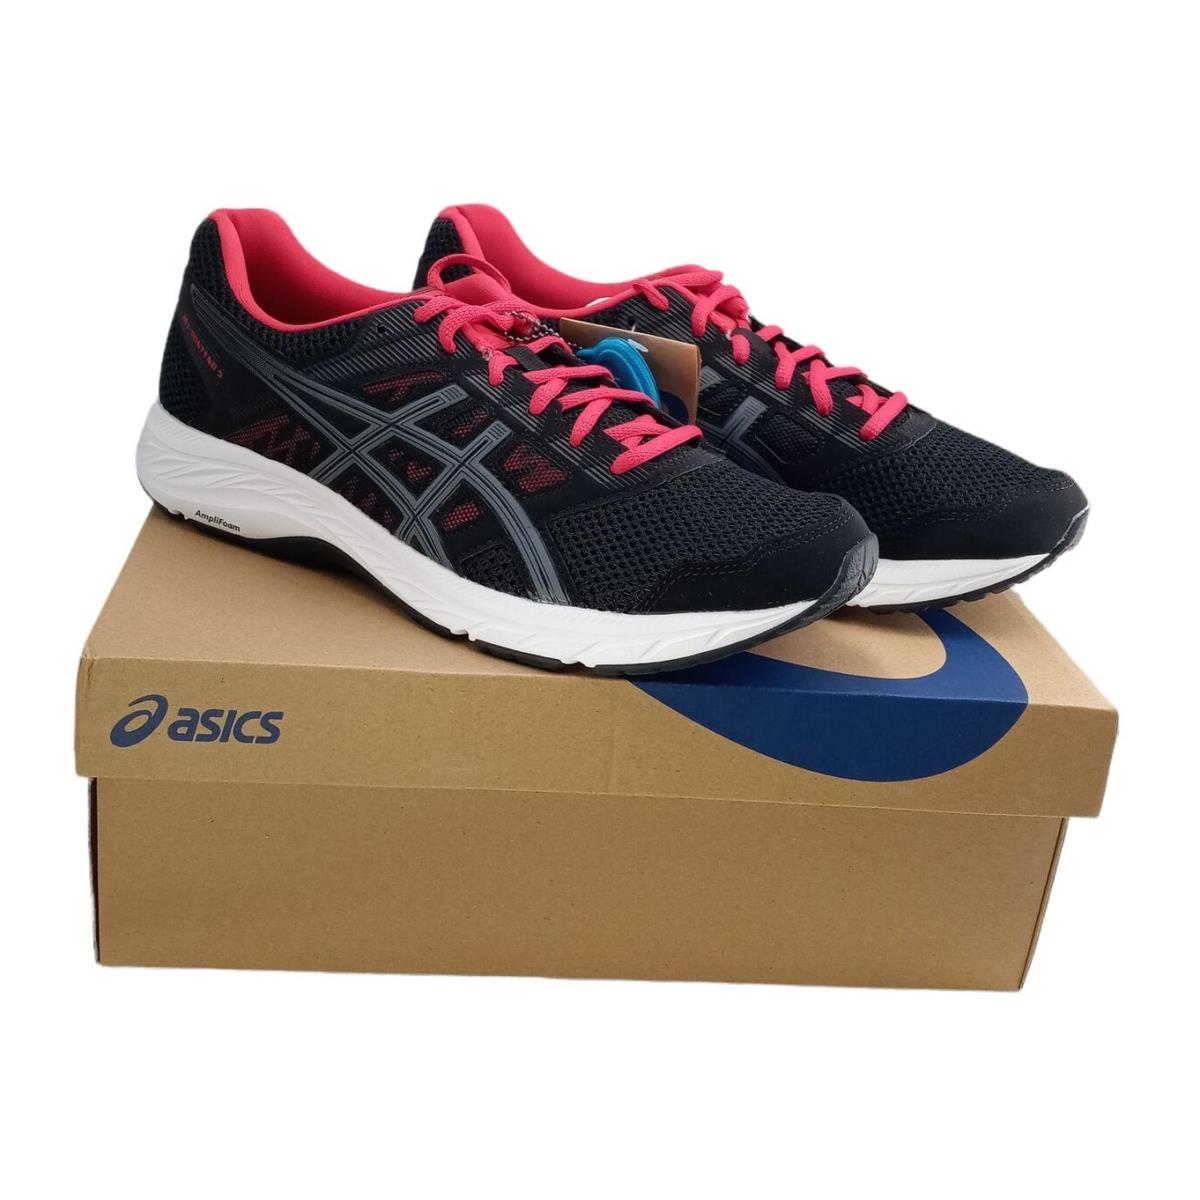 Asics Gel Contend 5 Shoes Sneakers 1011A256-005 Black Red Grey Men Size 9.5